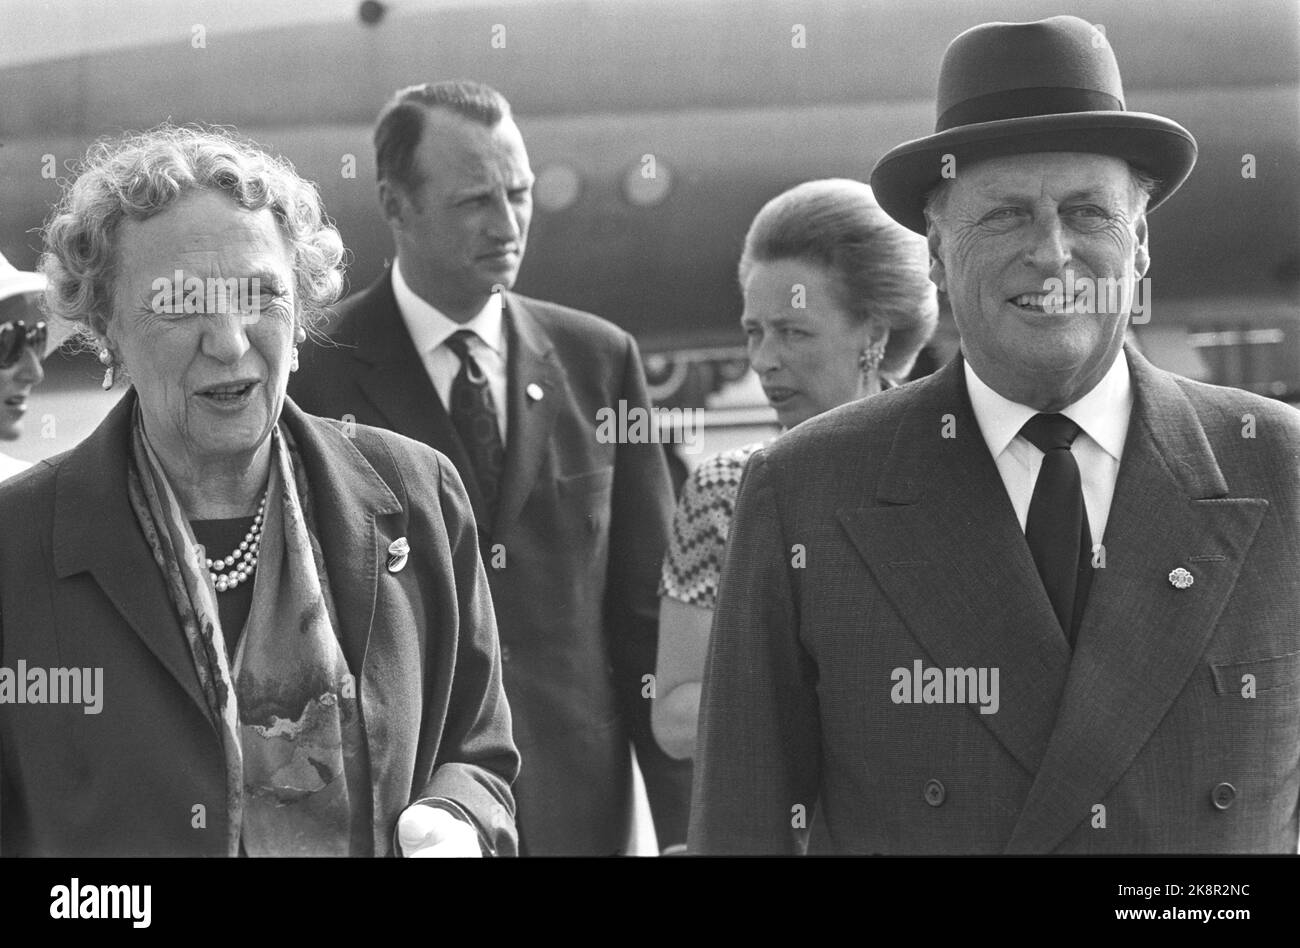 Oslo 19720802. King Haakon's VII 100th anniversary. Princess Margaretha by Denmark (t.v.) was received by King Olav, Princess Ragnhild and Crown Prince Harald on arrival at Fornebu. Princess Margaretha will participate in the connection with the memorials. (Princess Margaretha was at her birth princess both by Sweden and Norway. Later she became a princess of Sweden, and after she got married: Princess of Denmark.) Photo: NTB / NTB Stock Photo